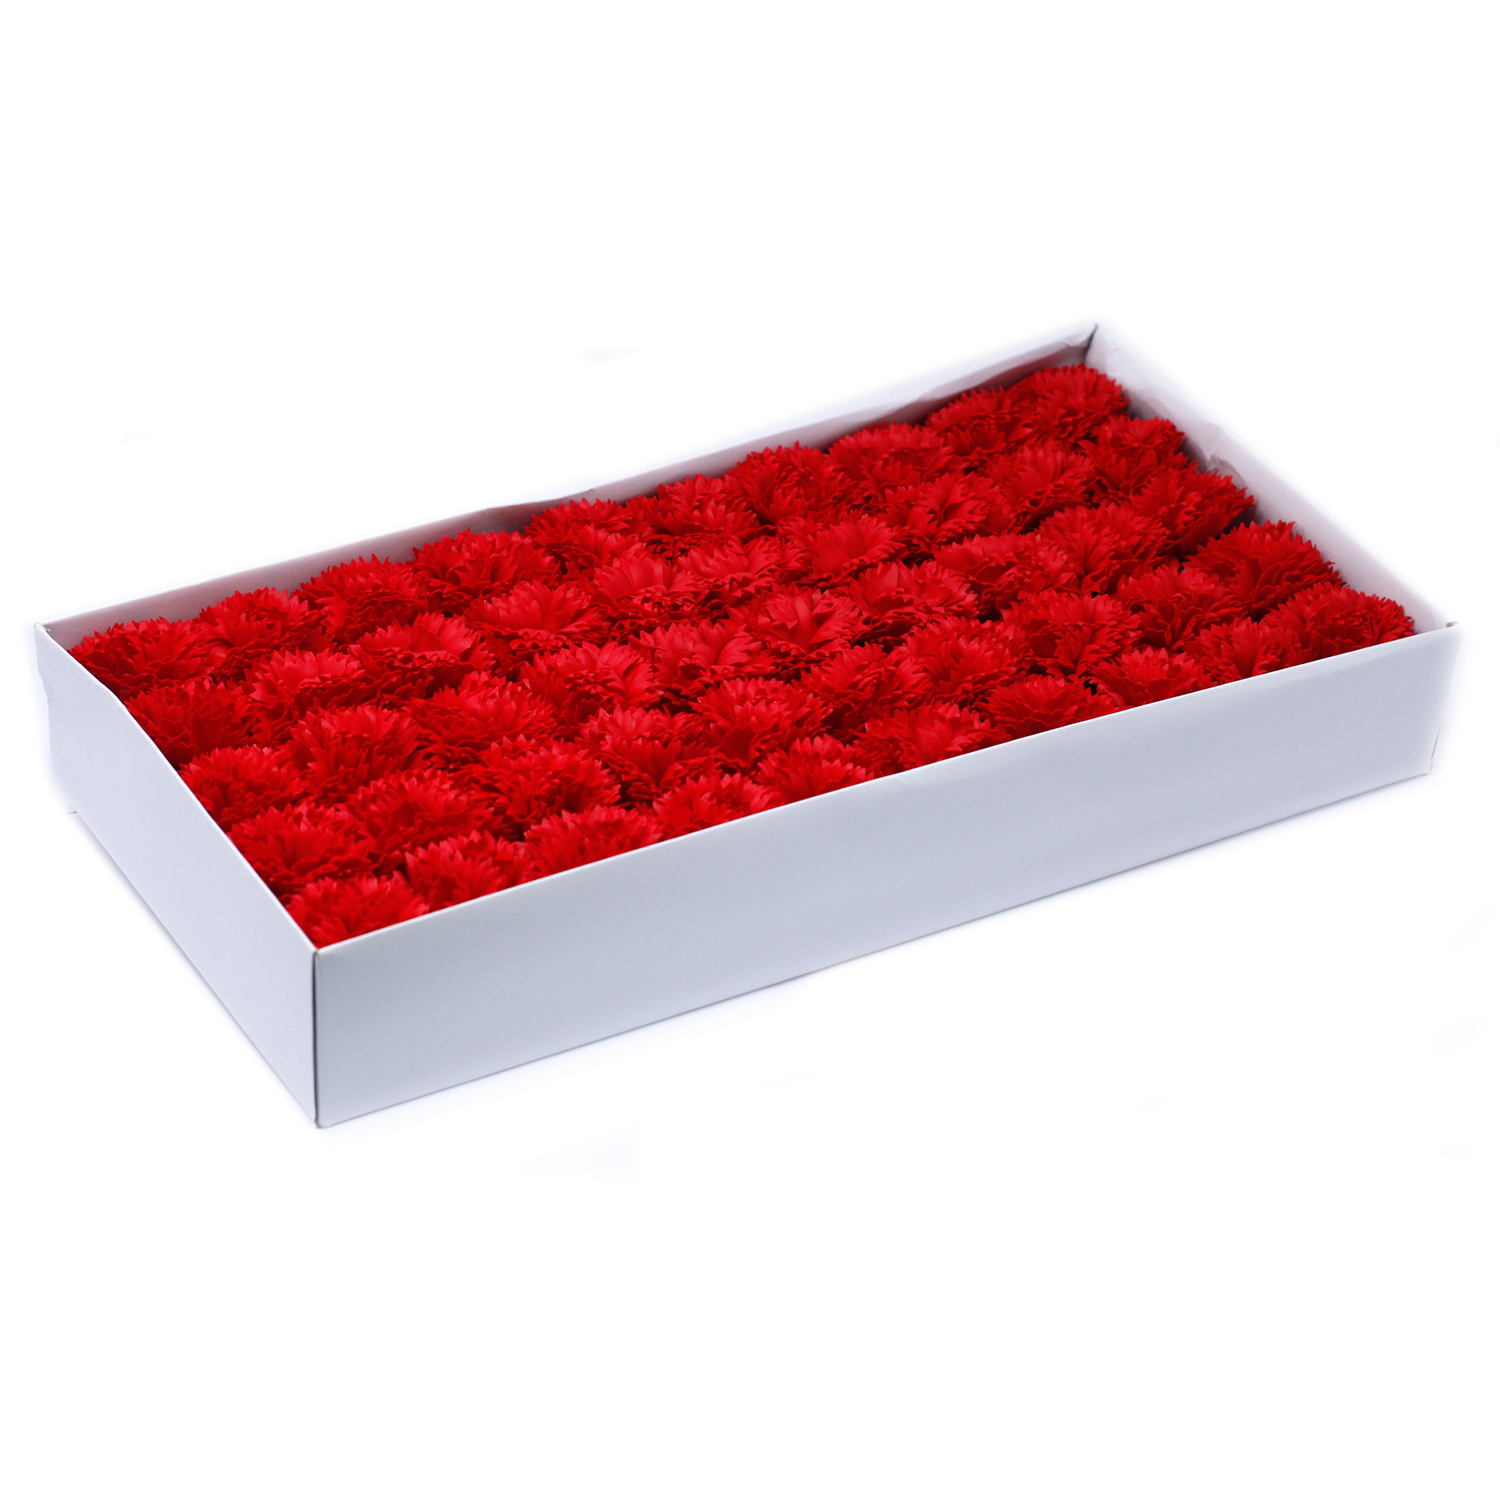 10 x Craft Soap Flowers - Carnations - Red